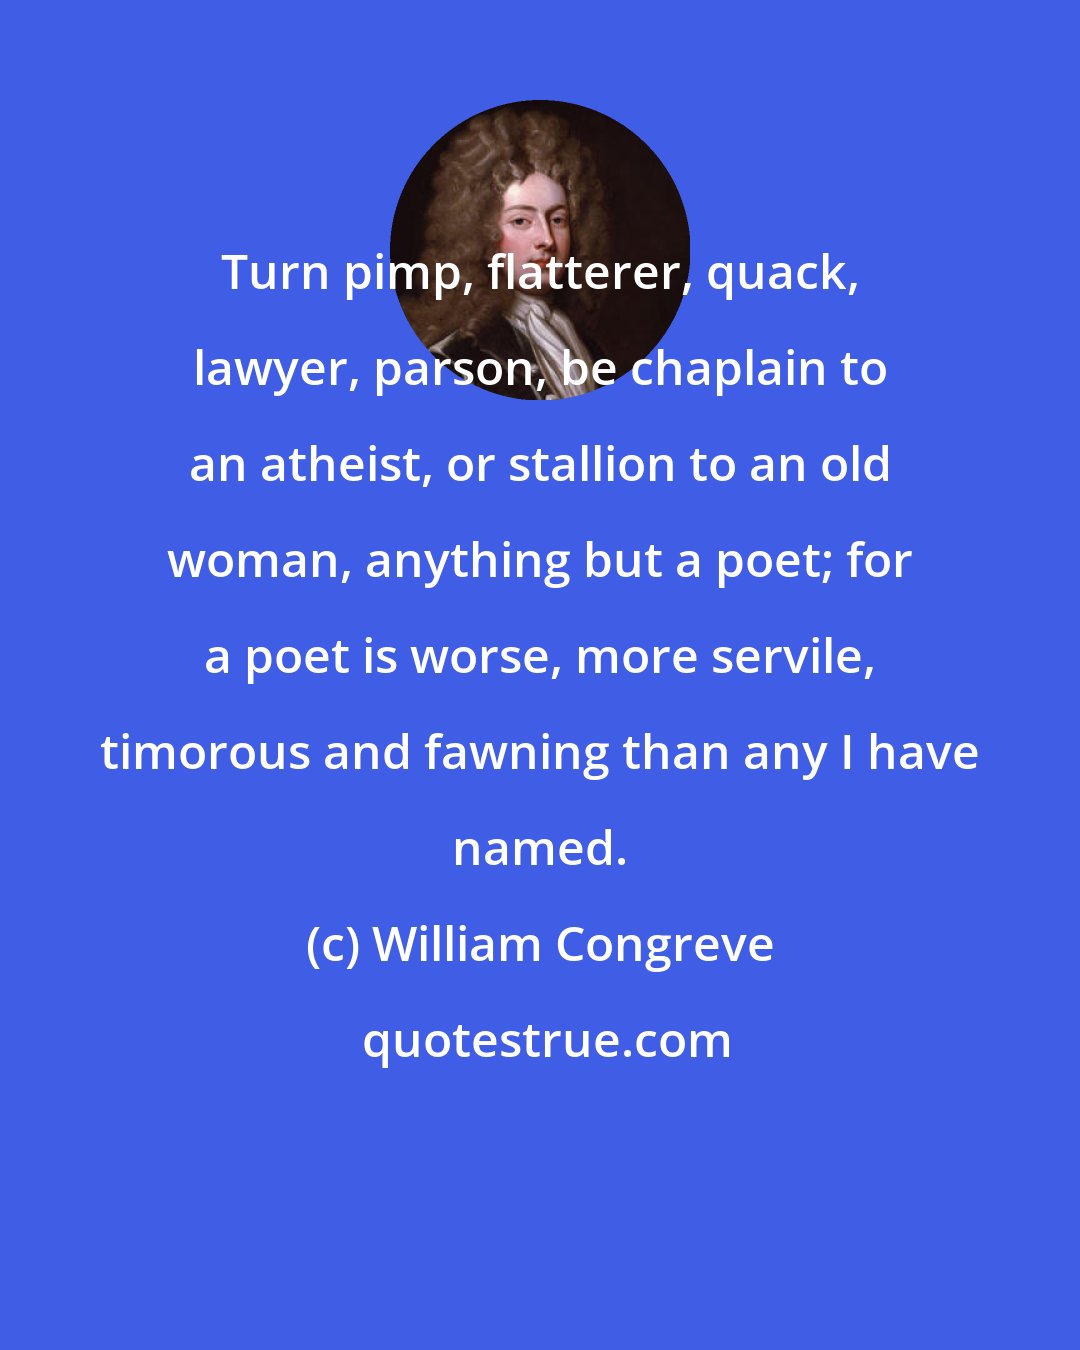 William Congreve: Turn pimp, flatterer, quack, lawyer, parson, be chaplain to an atheist, or stallion to an old woman, anything but a poet; for a poet is worse, more servile, timorous and fawning than any I have named.